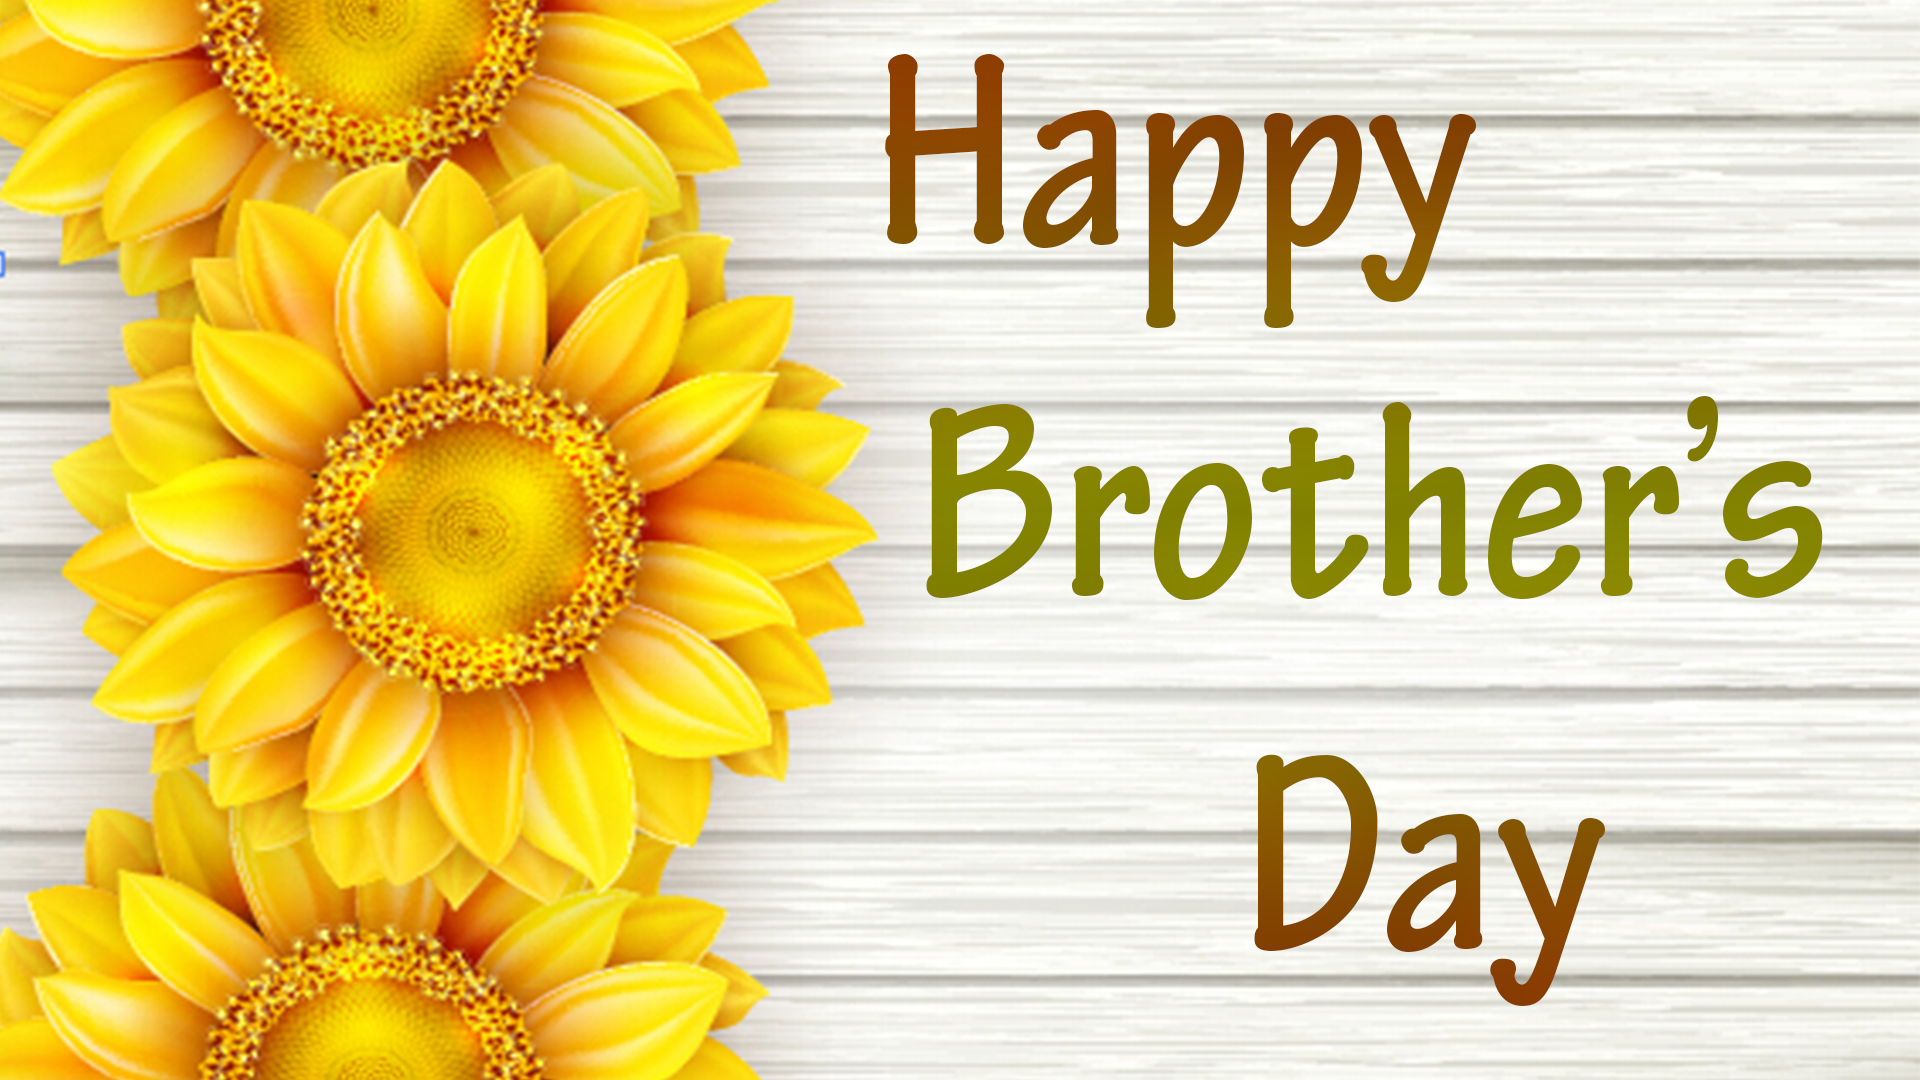 happy brothers day image